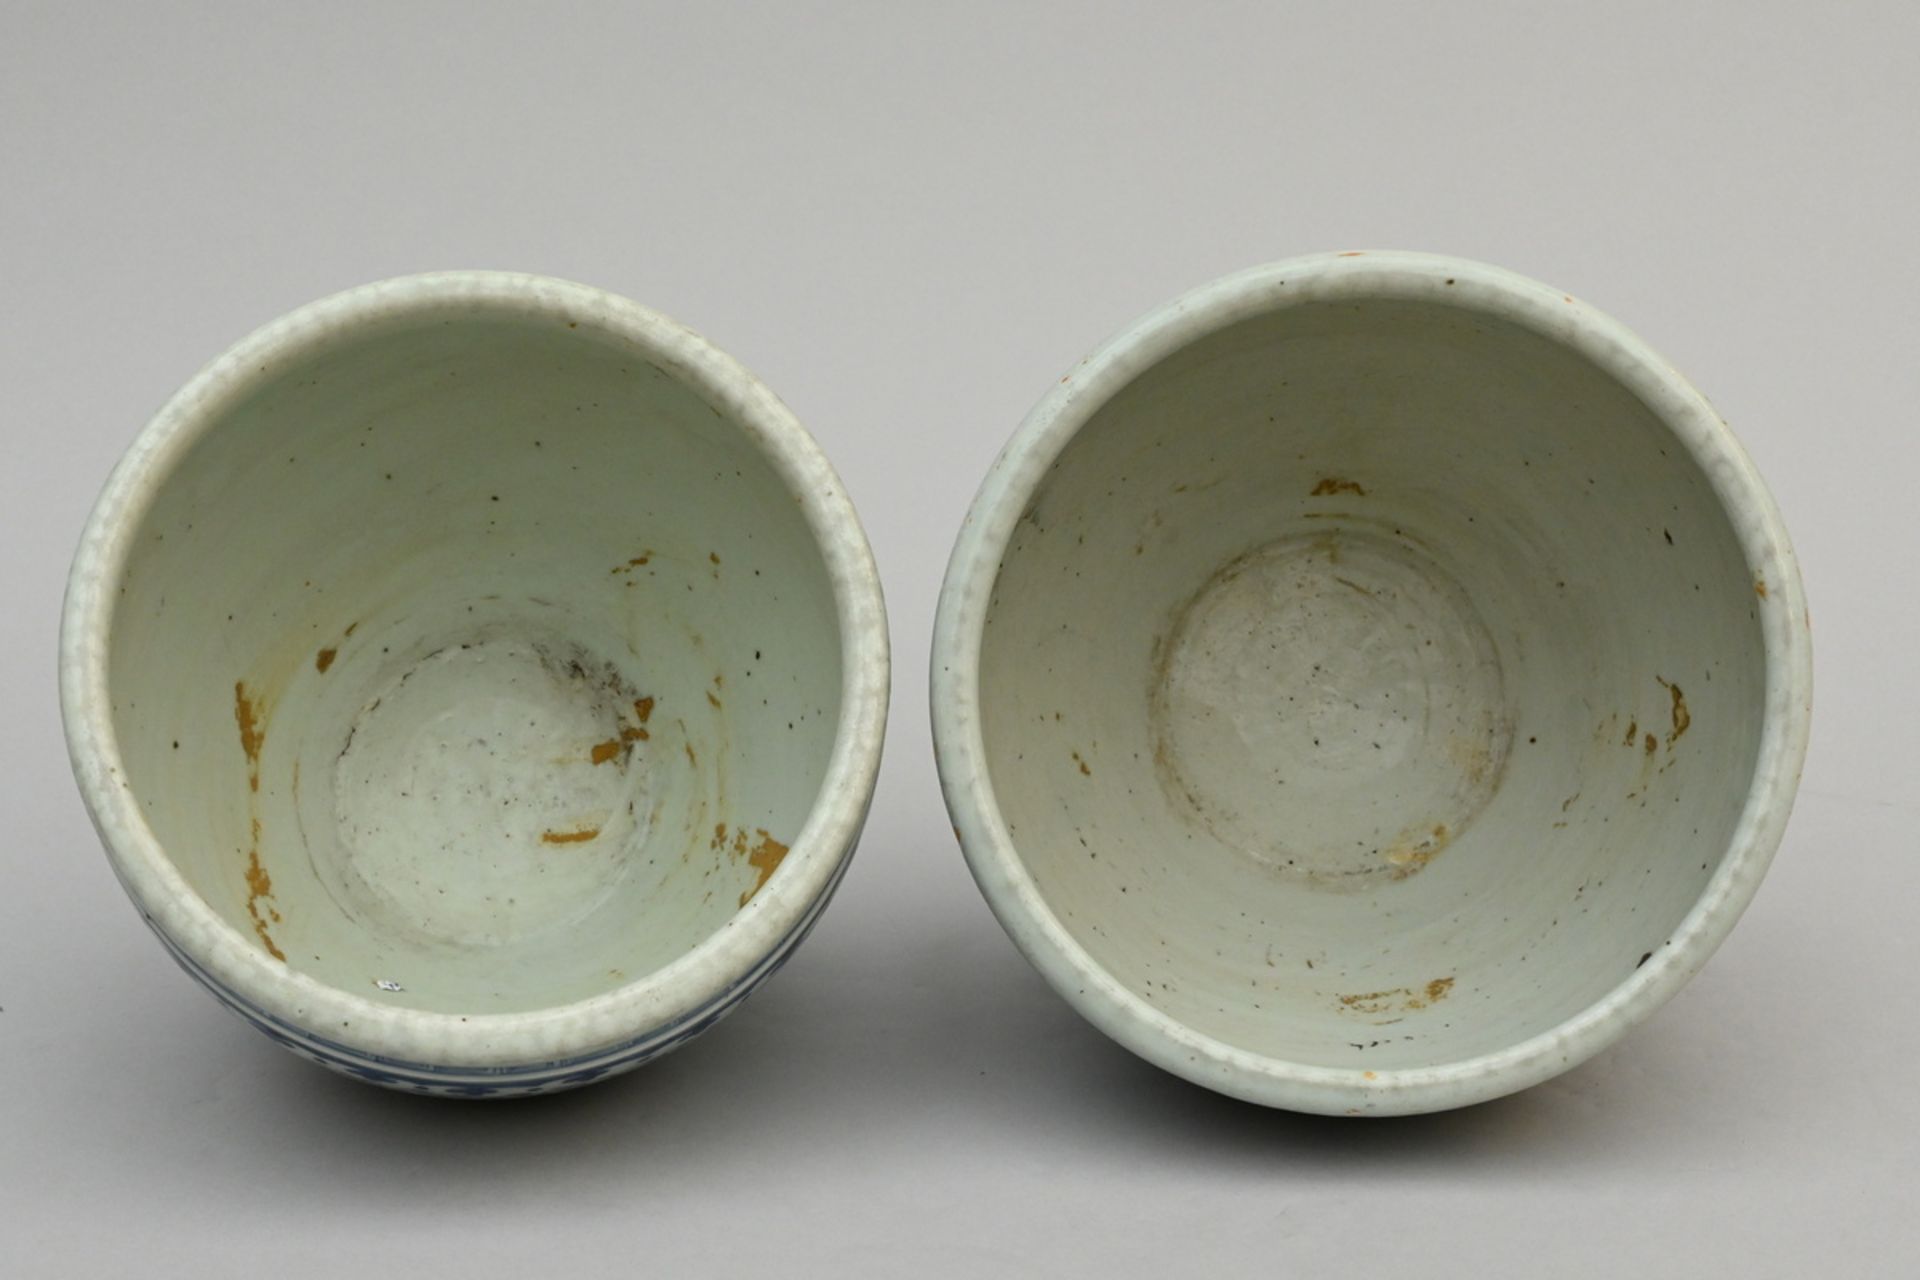 Two Chinese planters in blue and white porcelain, 19th century (dia 26-27.5cm) - Image 3 of 4